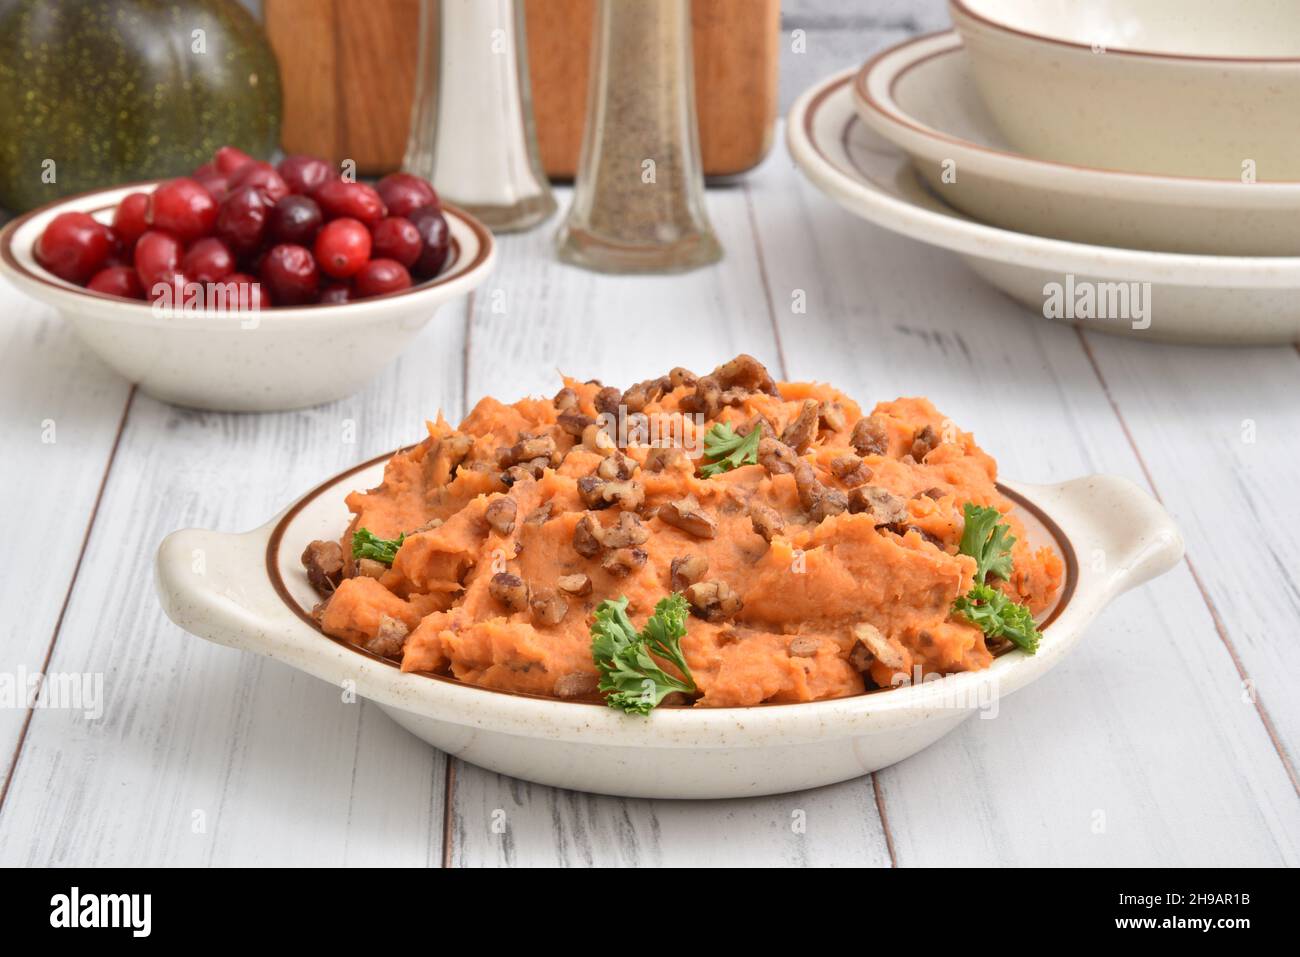 A bowl of sweet potatoes with glazed pecans on a holiday table Stock Photo